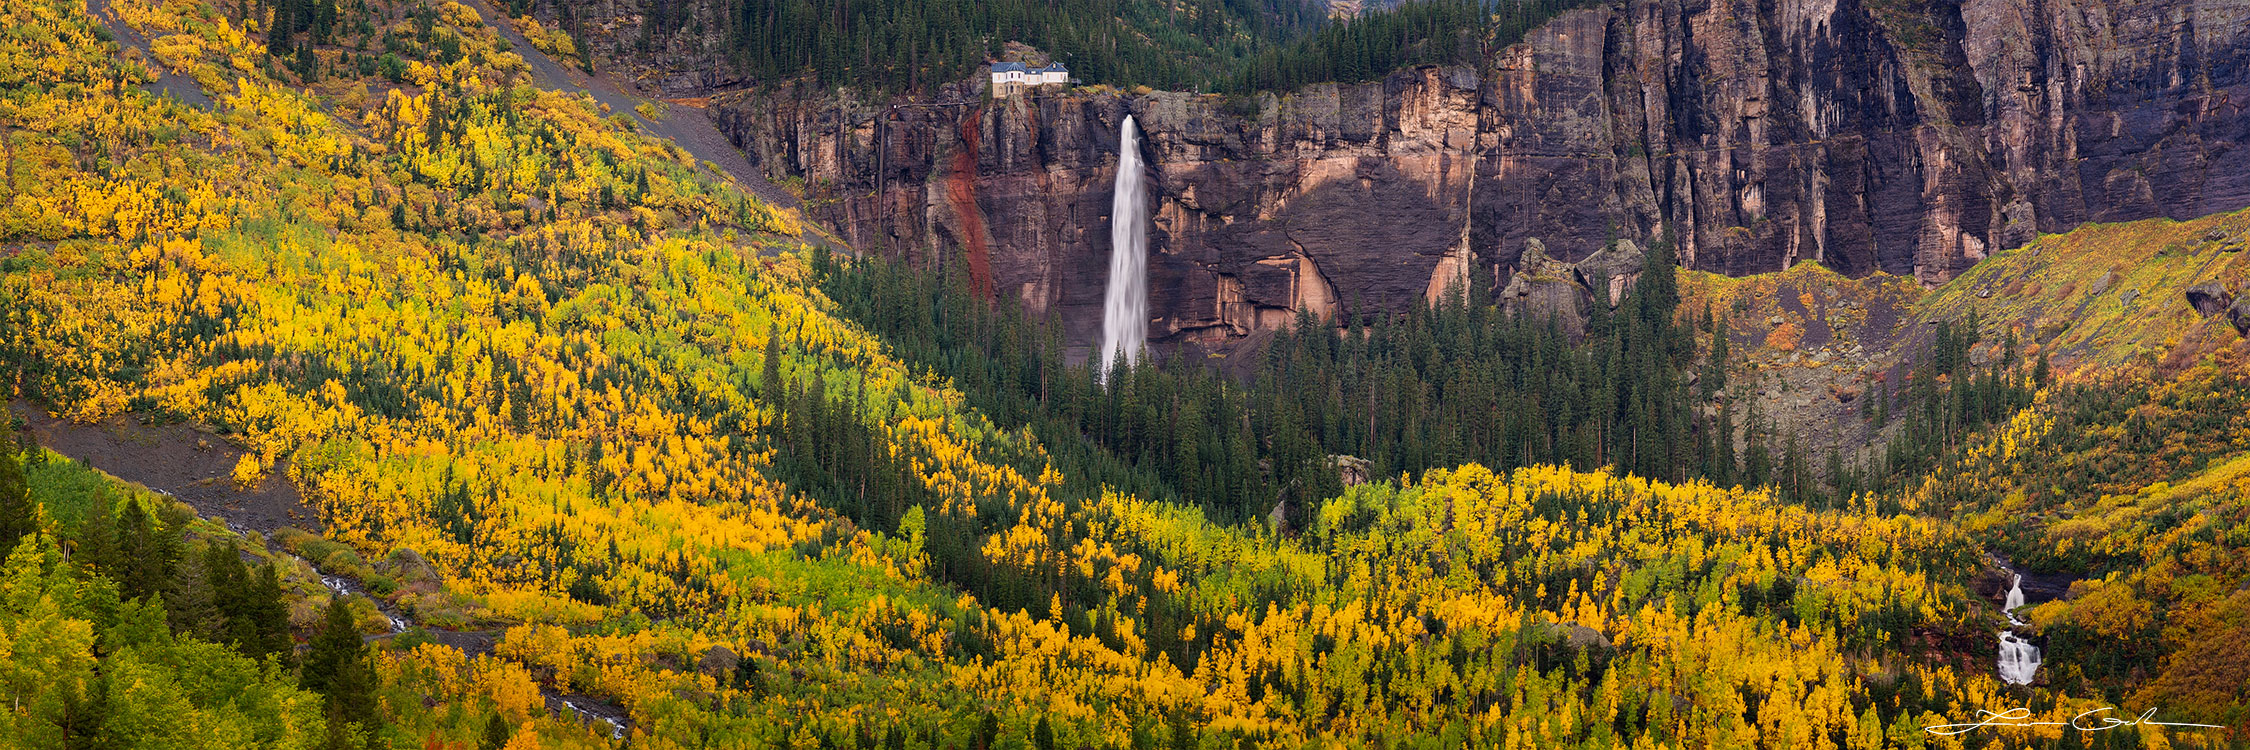 Panorama of bridal veul falls near Telluride, Colorado at peak fall colors with a big aspen valley and lots of aspen trees with golden leaves - Gintchin Fine Art